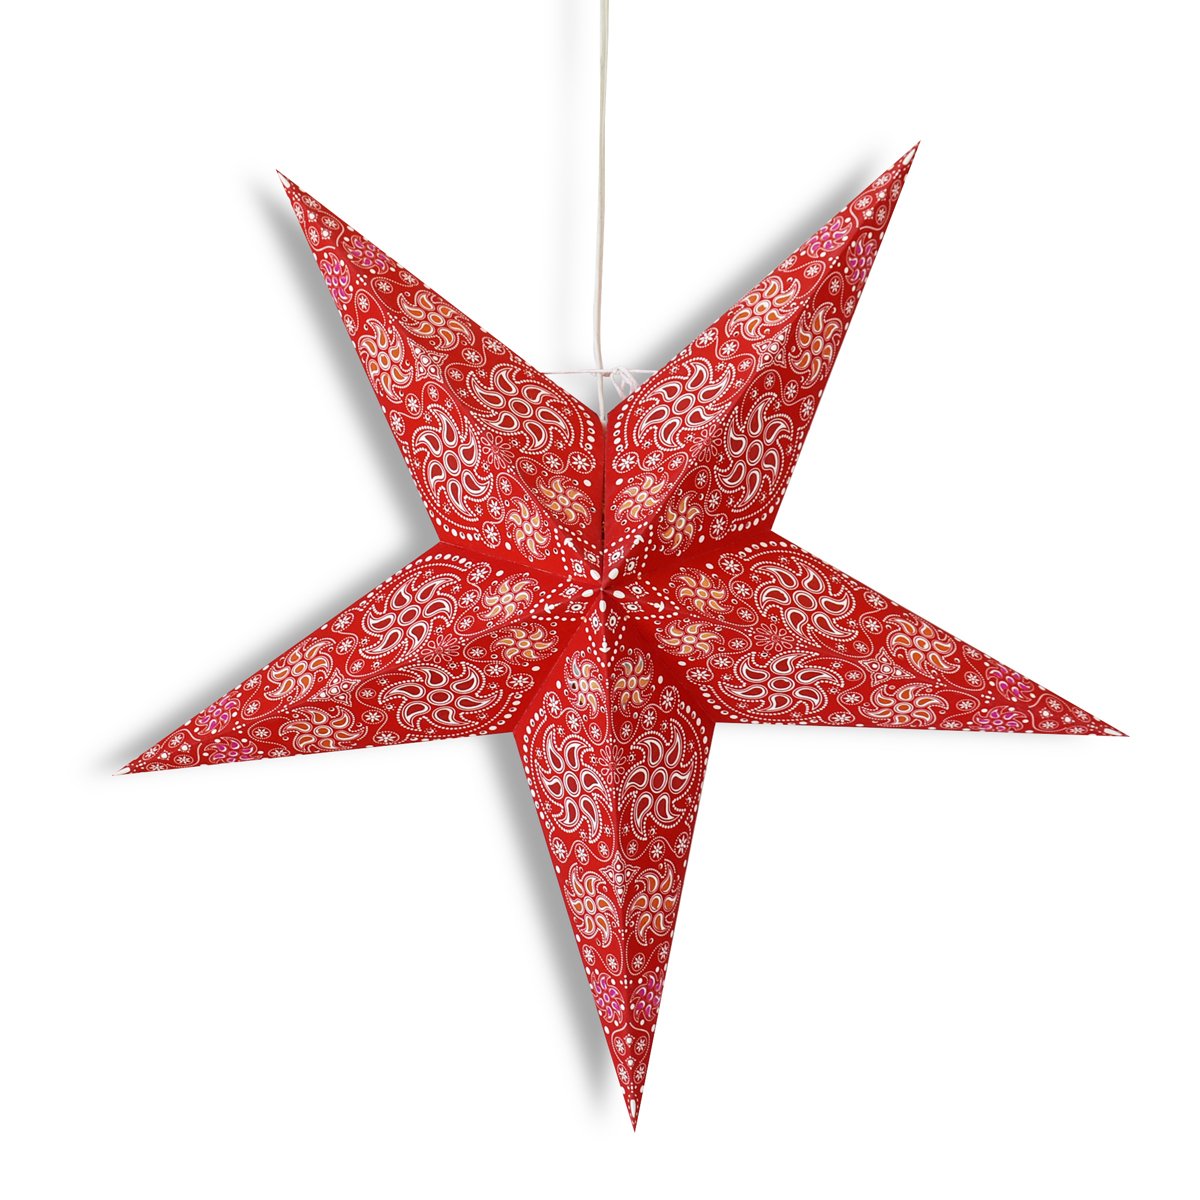 3-PACK + Cord | 24" Red Winds Paper Star Lantern and Lamp Cord Hanging Decoration - AsianImportStore.com - B2B Wholesale Lighting and Decor